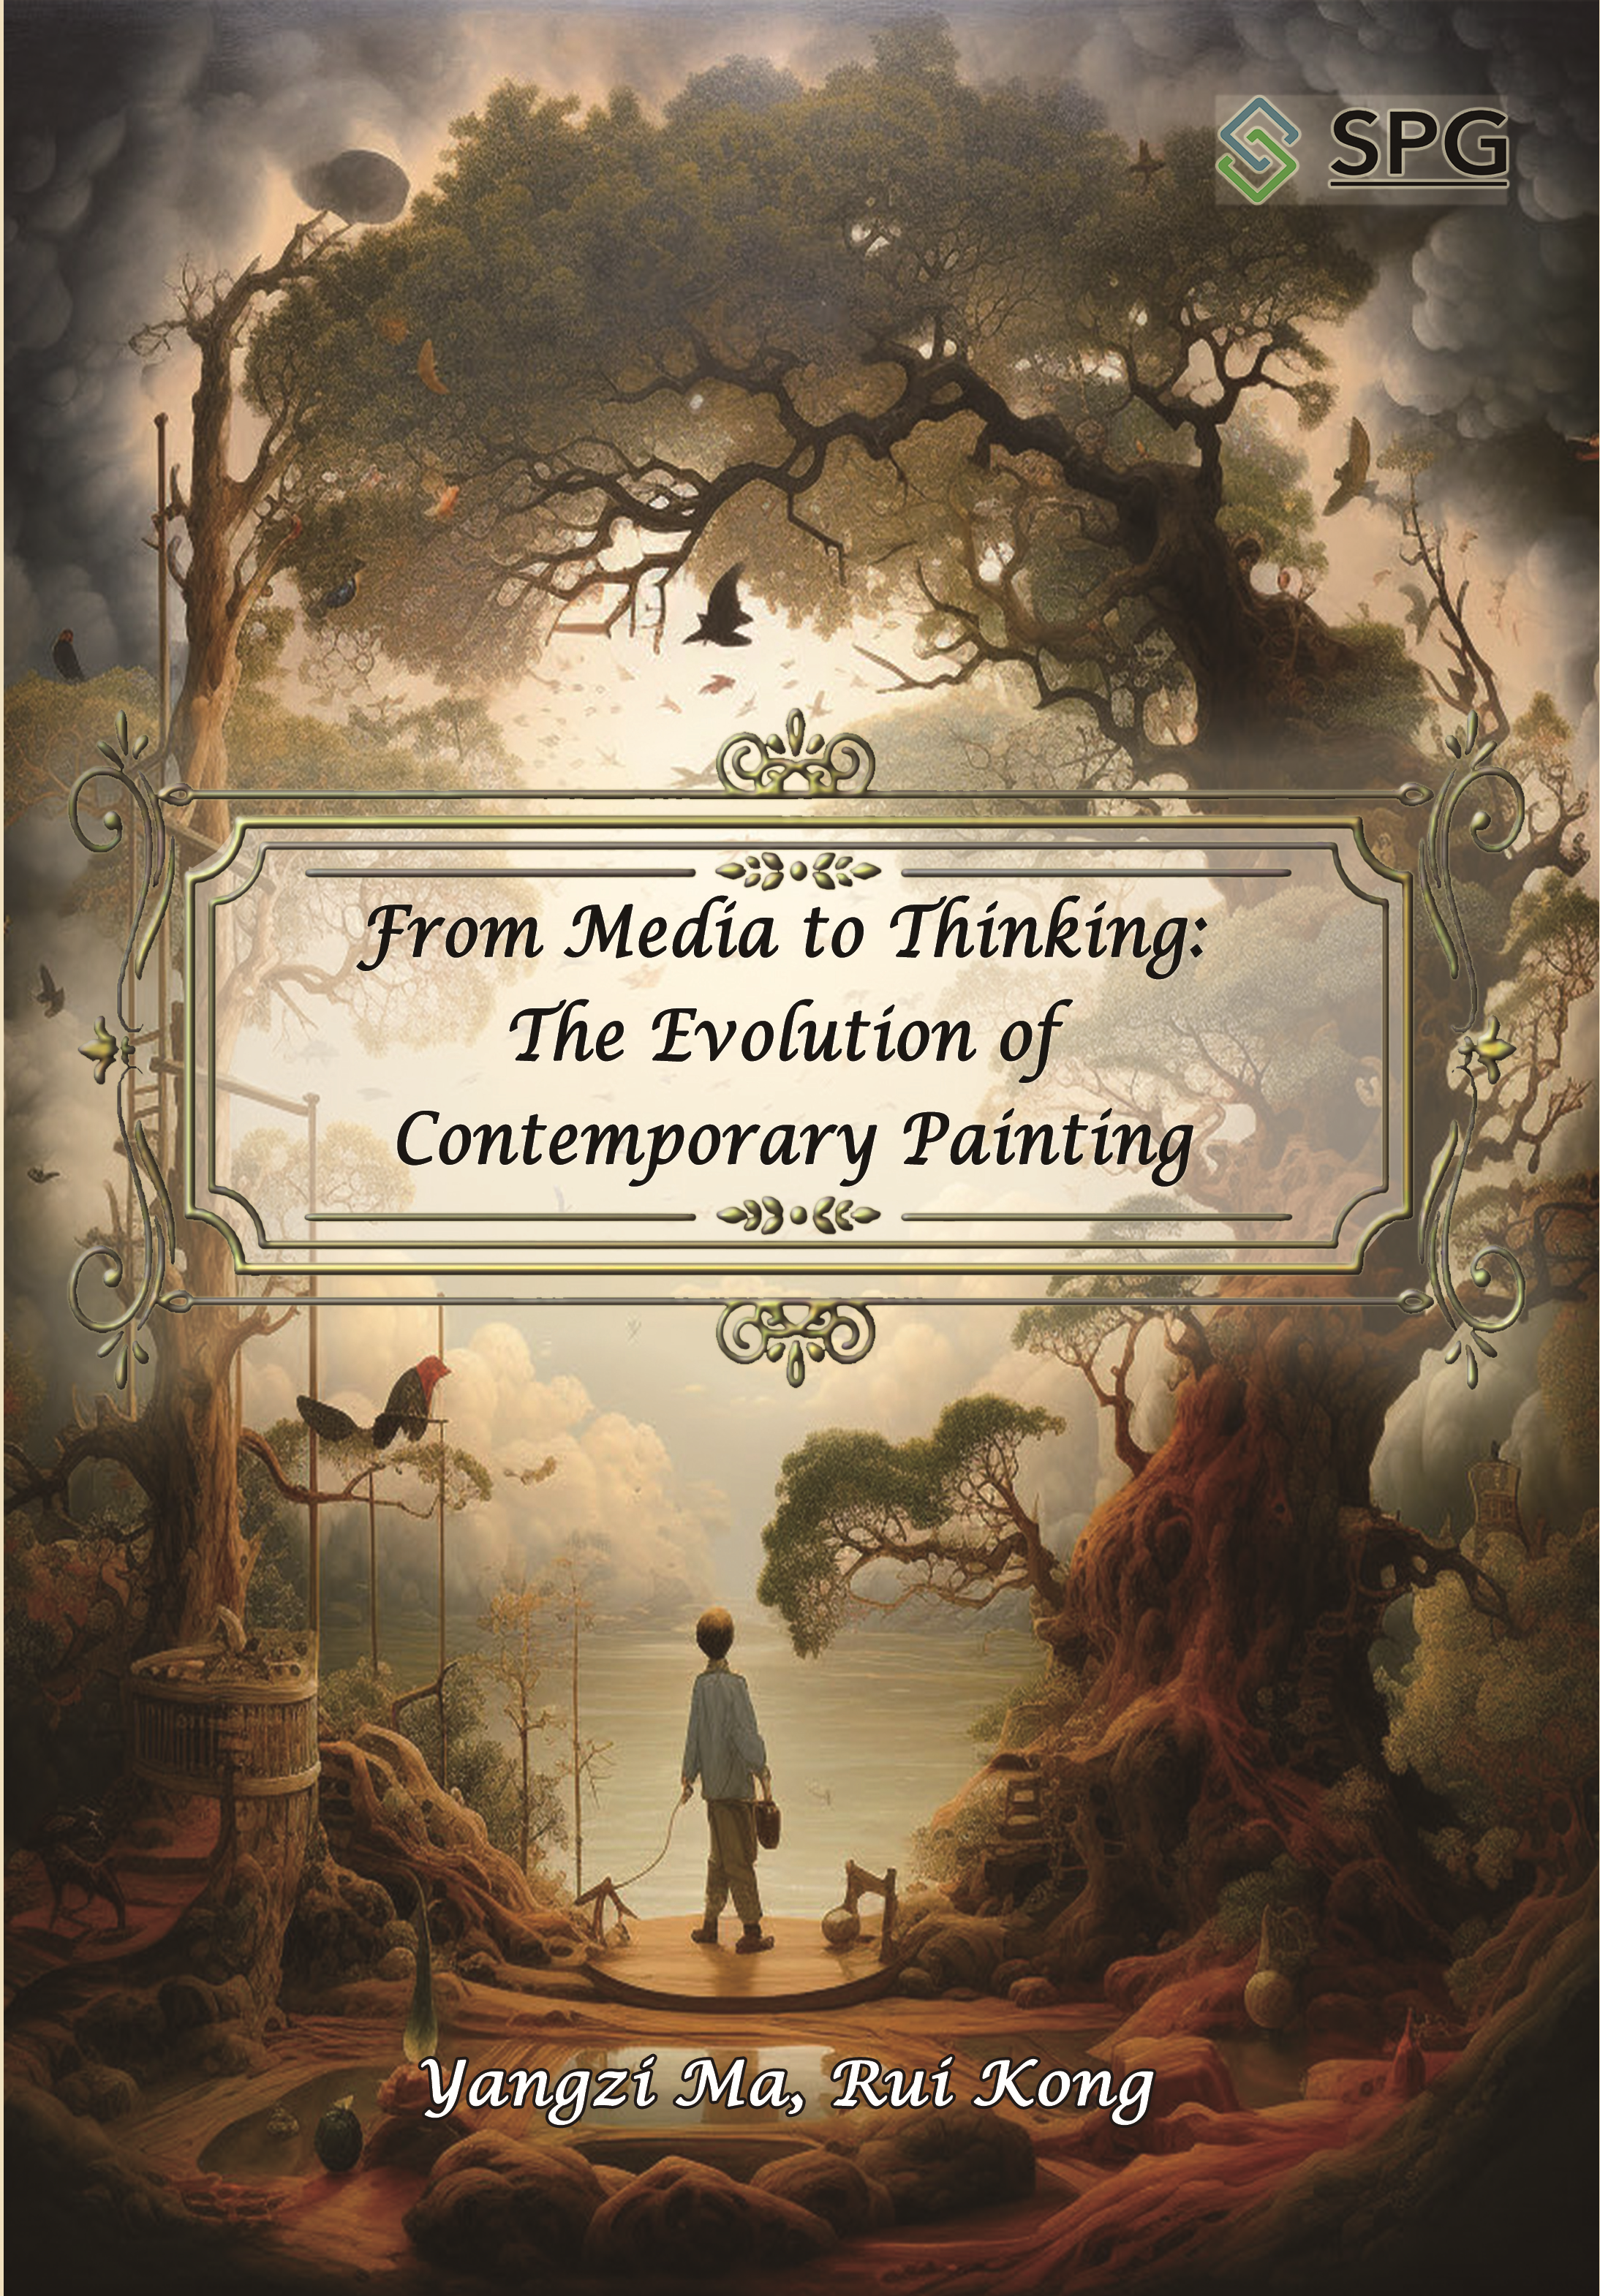 From Media to Thinking: The Evolution of Contemporary Painting | Scholar Publishing Group